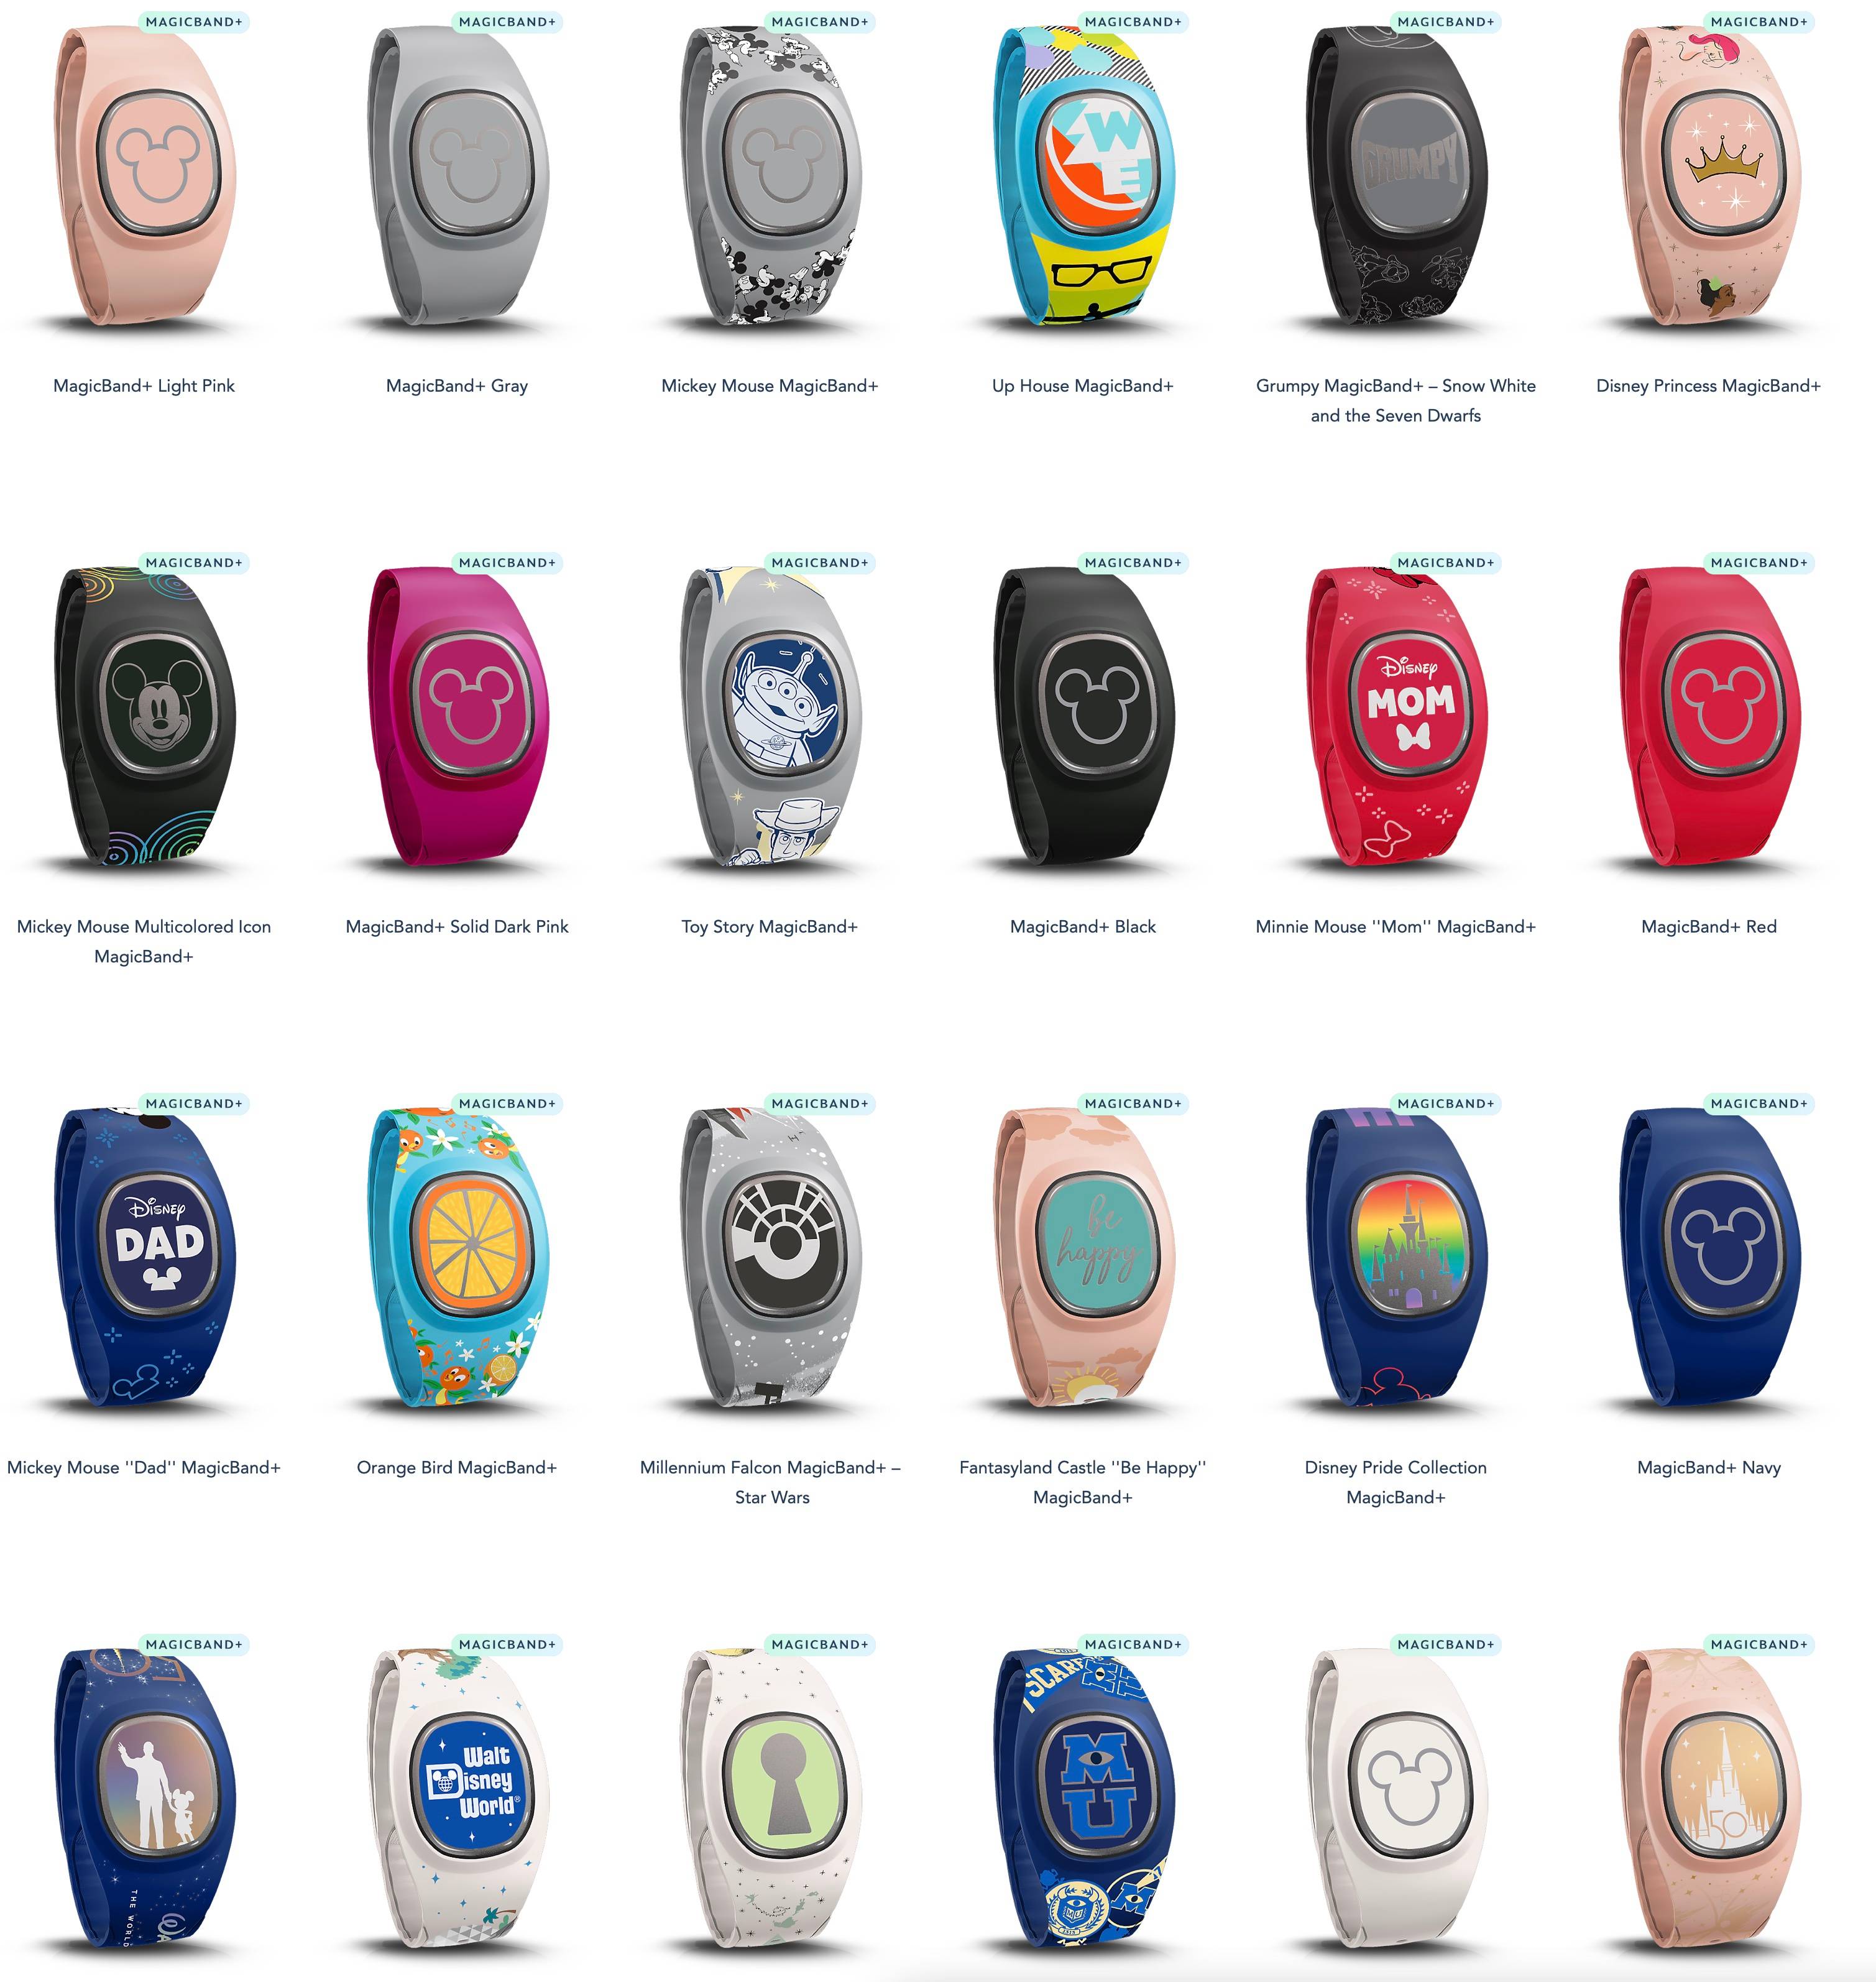 MagicBand+ now available for Walt Disney World resort guests and passholders